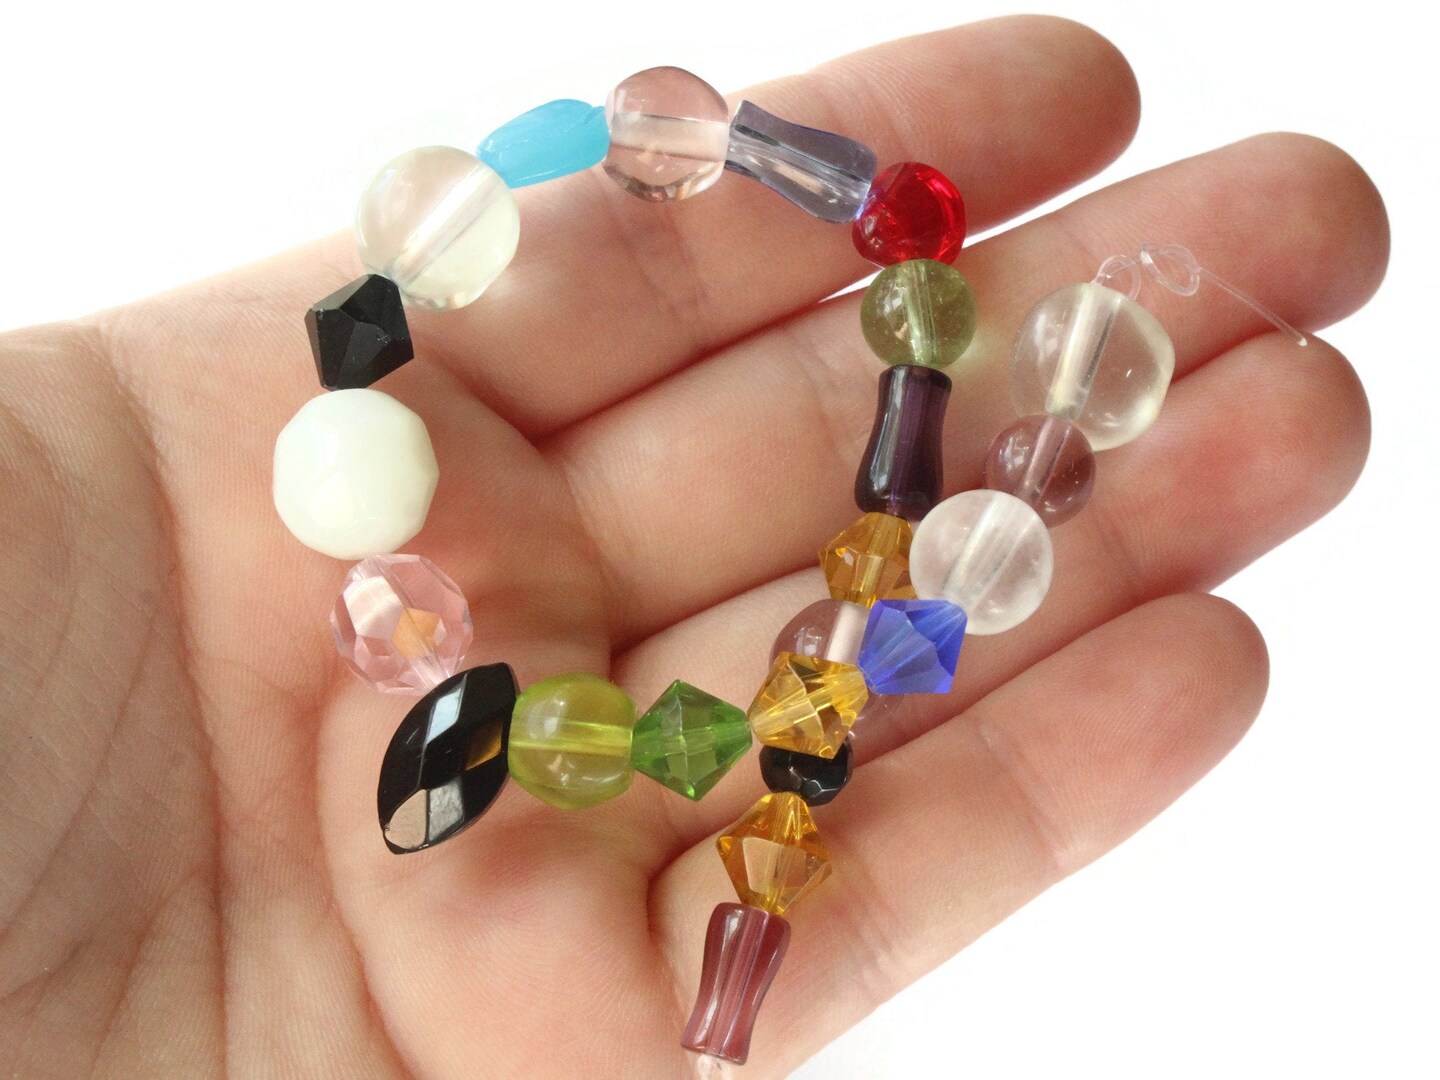 8 Inch Strand of Mixed Glass Beads to String